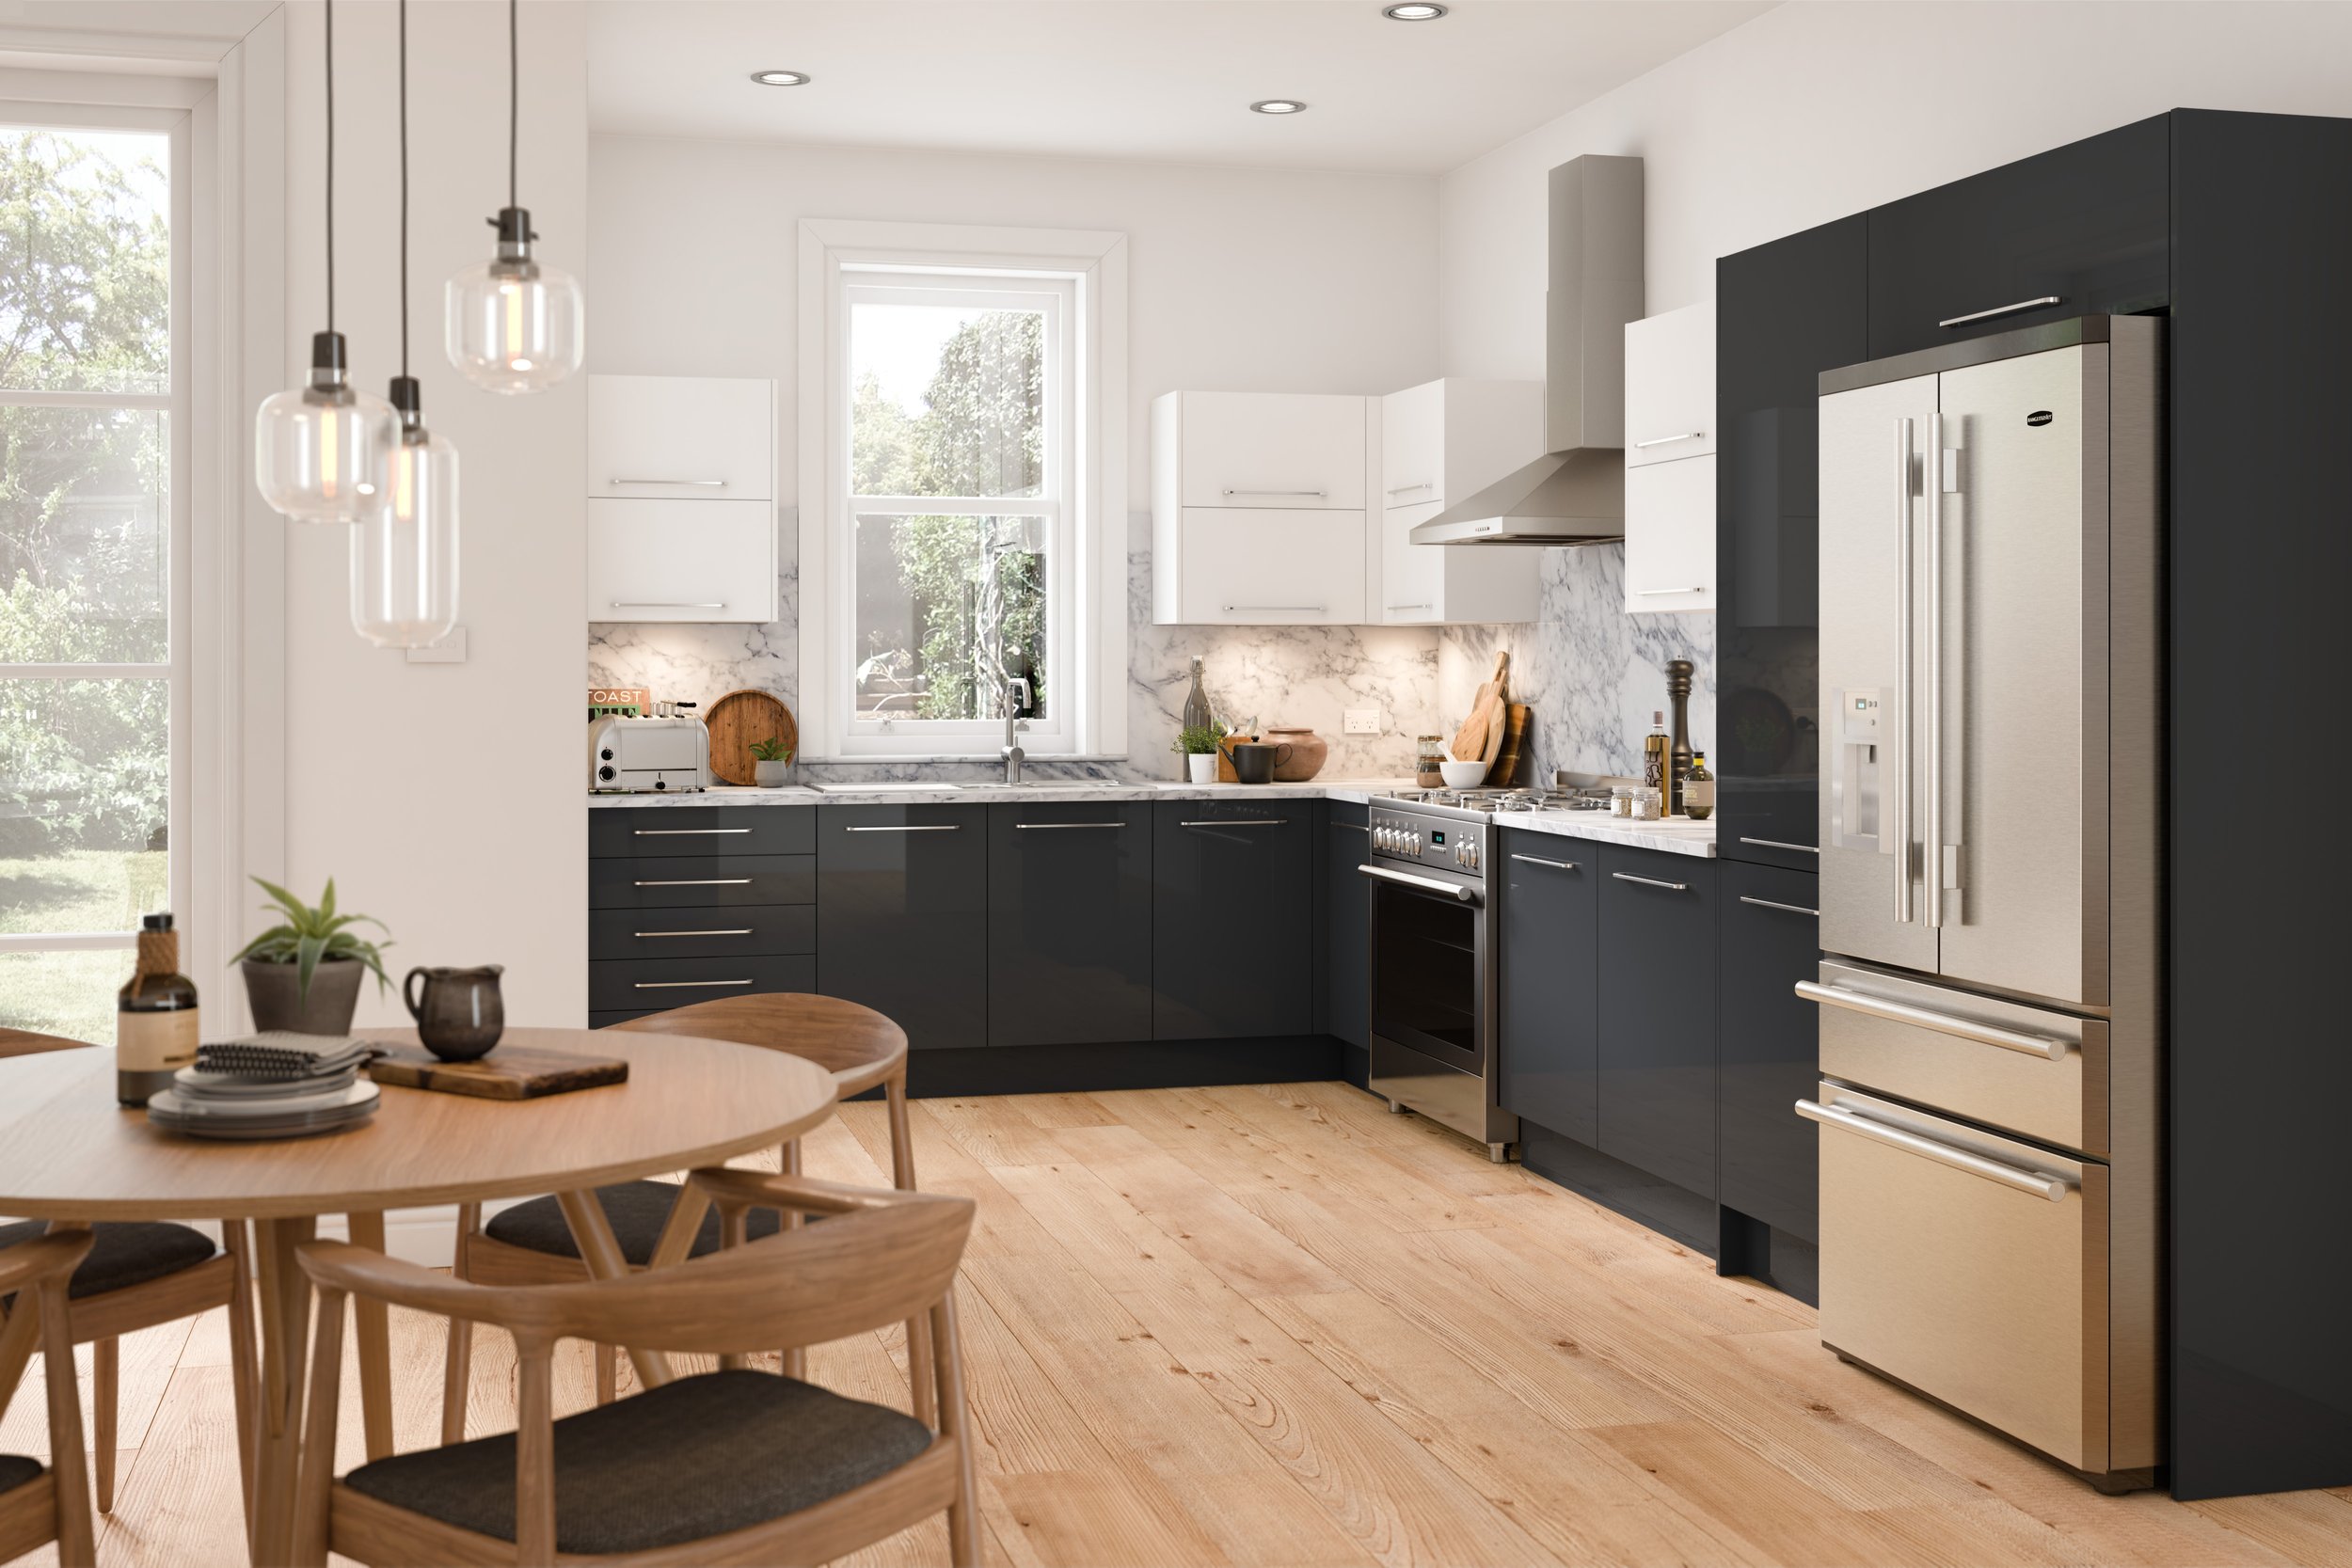 Replacement kitchen doors – the budget way to refresh units